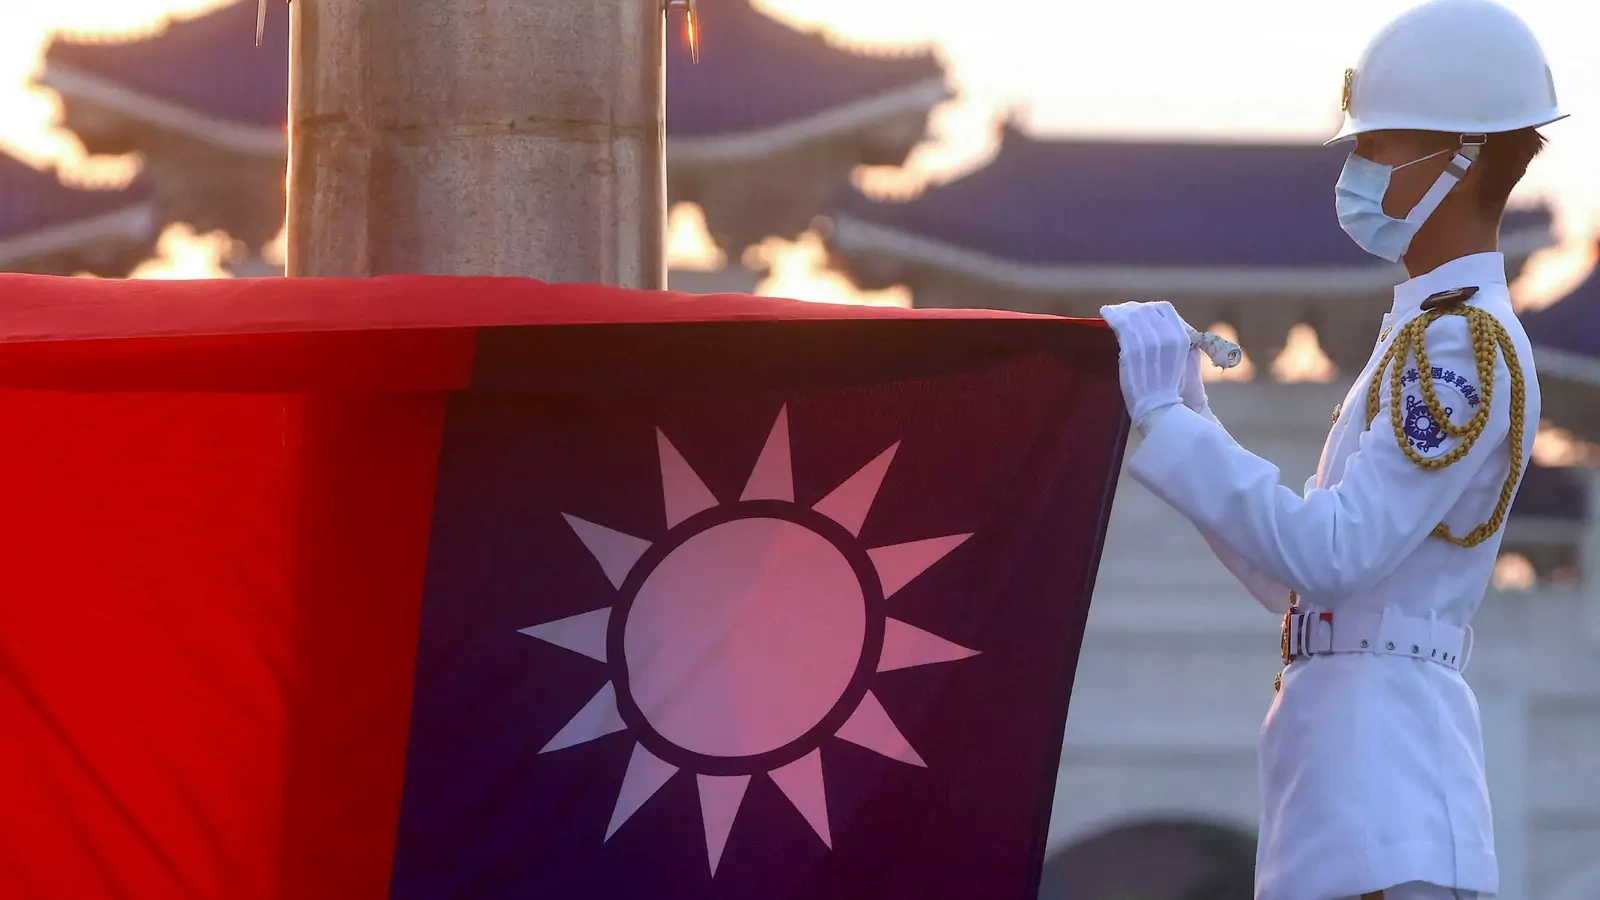 Honor guards lower the Taiwan flag during sunset hours at Liberty Square in Taipei.